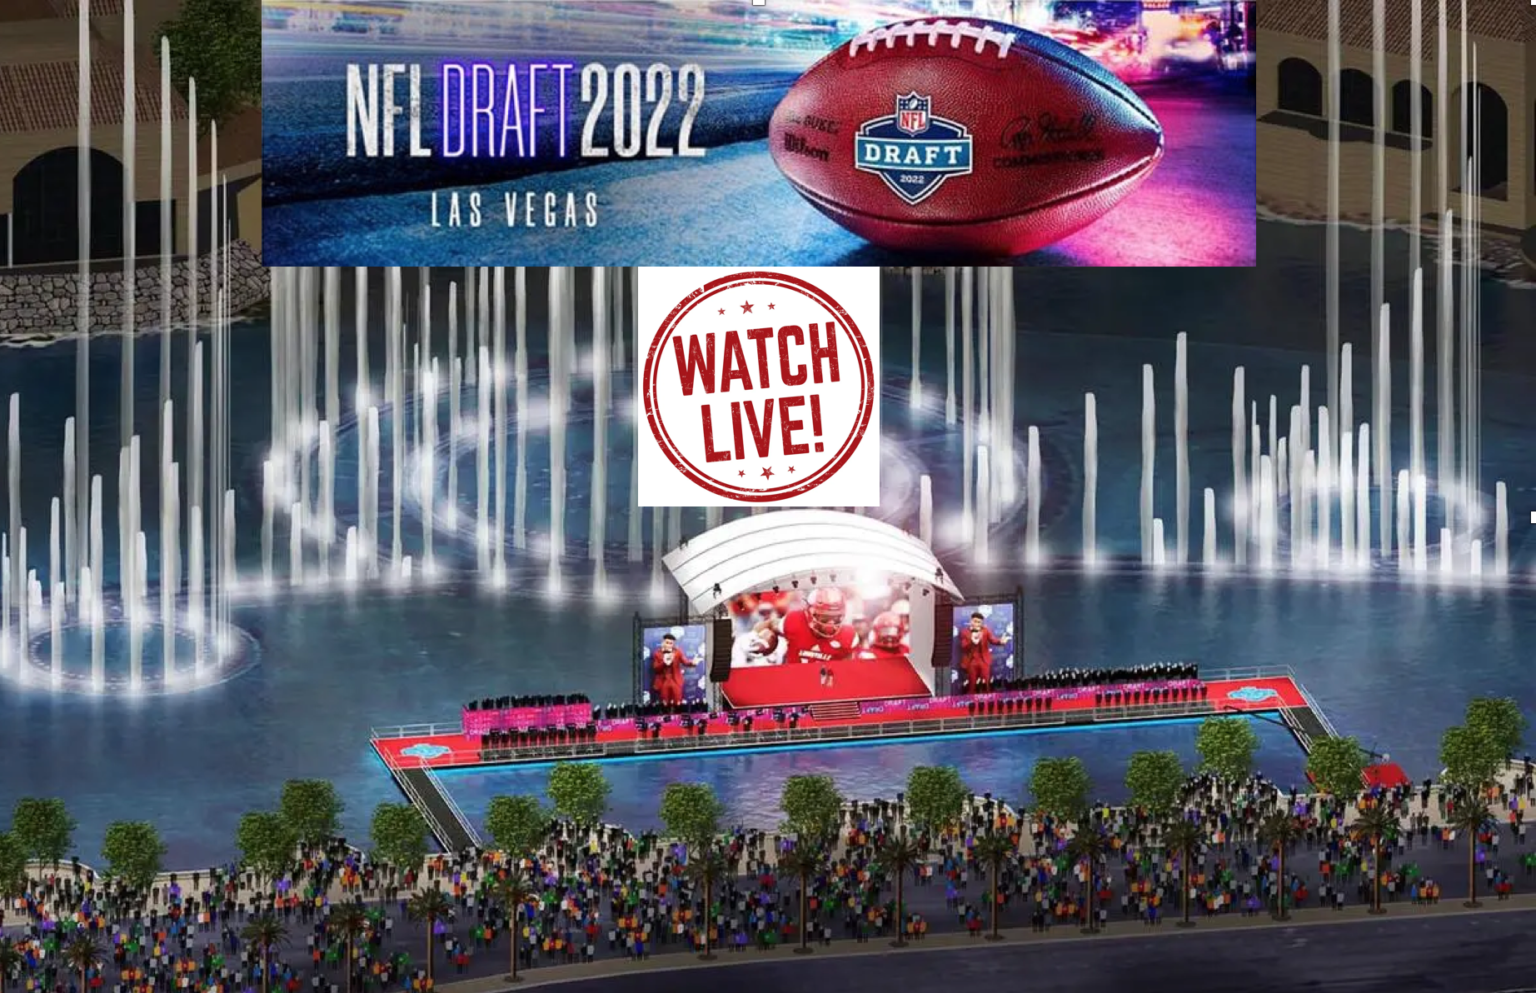 Live Coverage of The 2022 NFL Draft